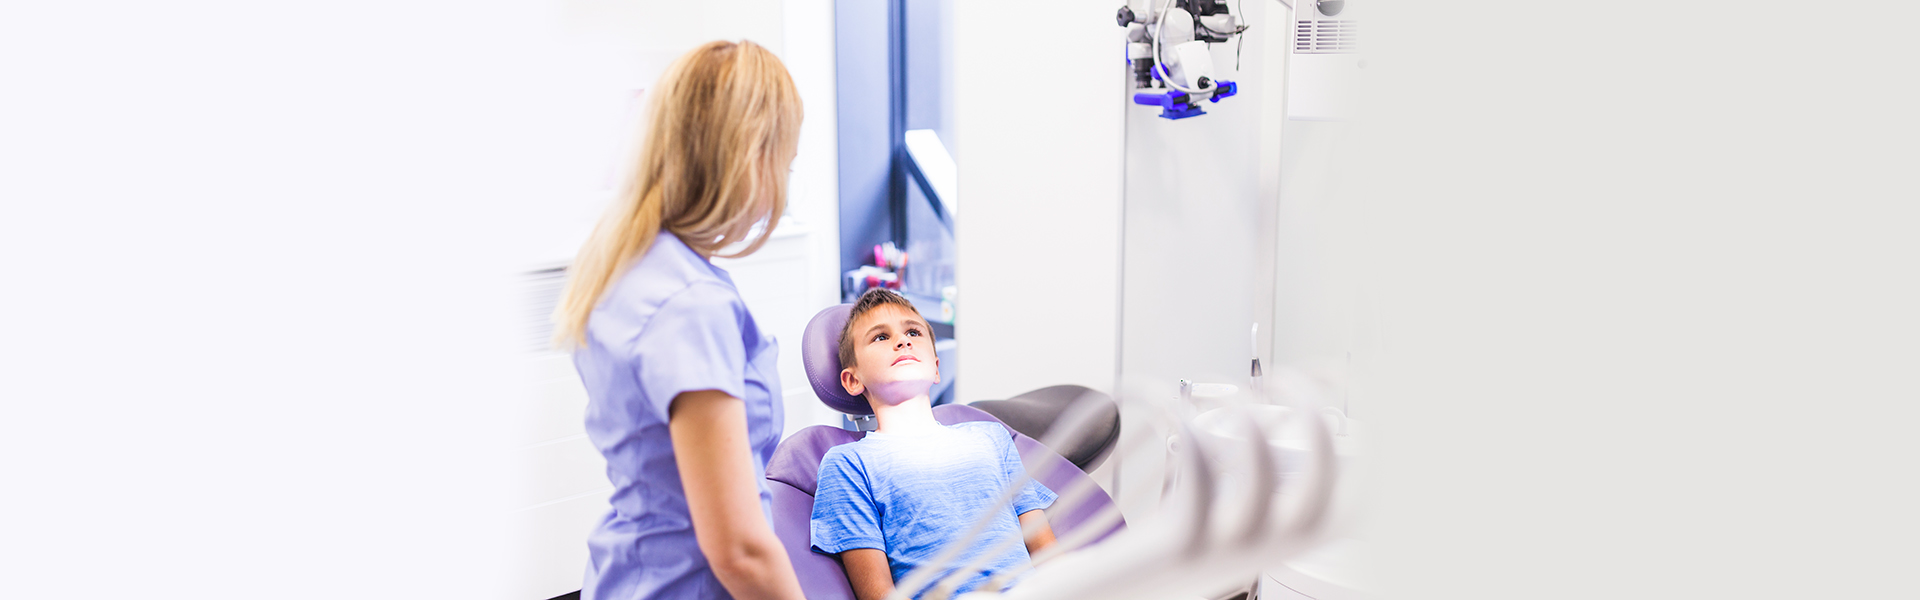 Preparing for Your Child’s First Dental Visit